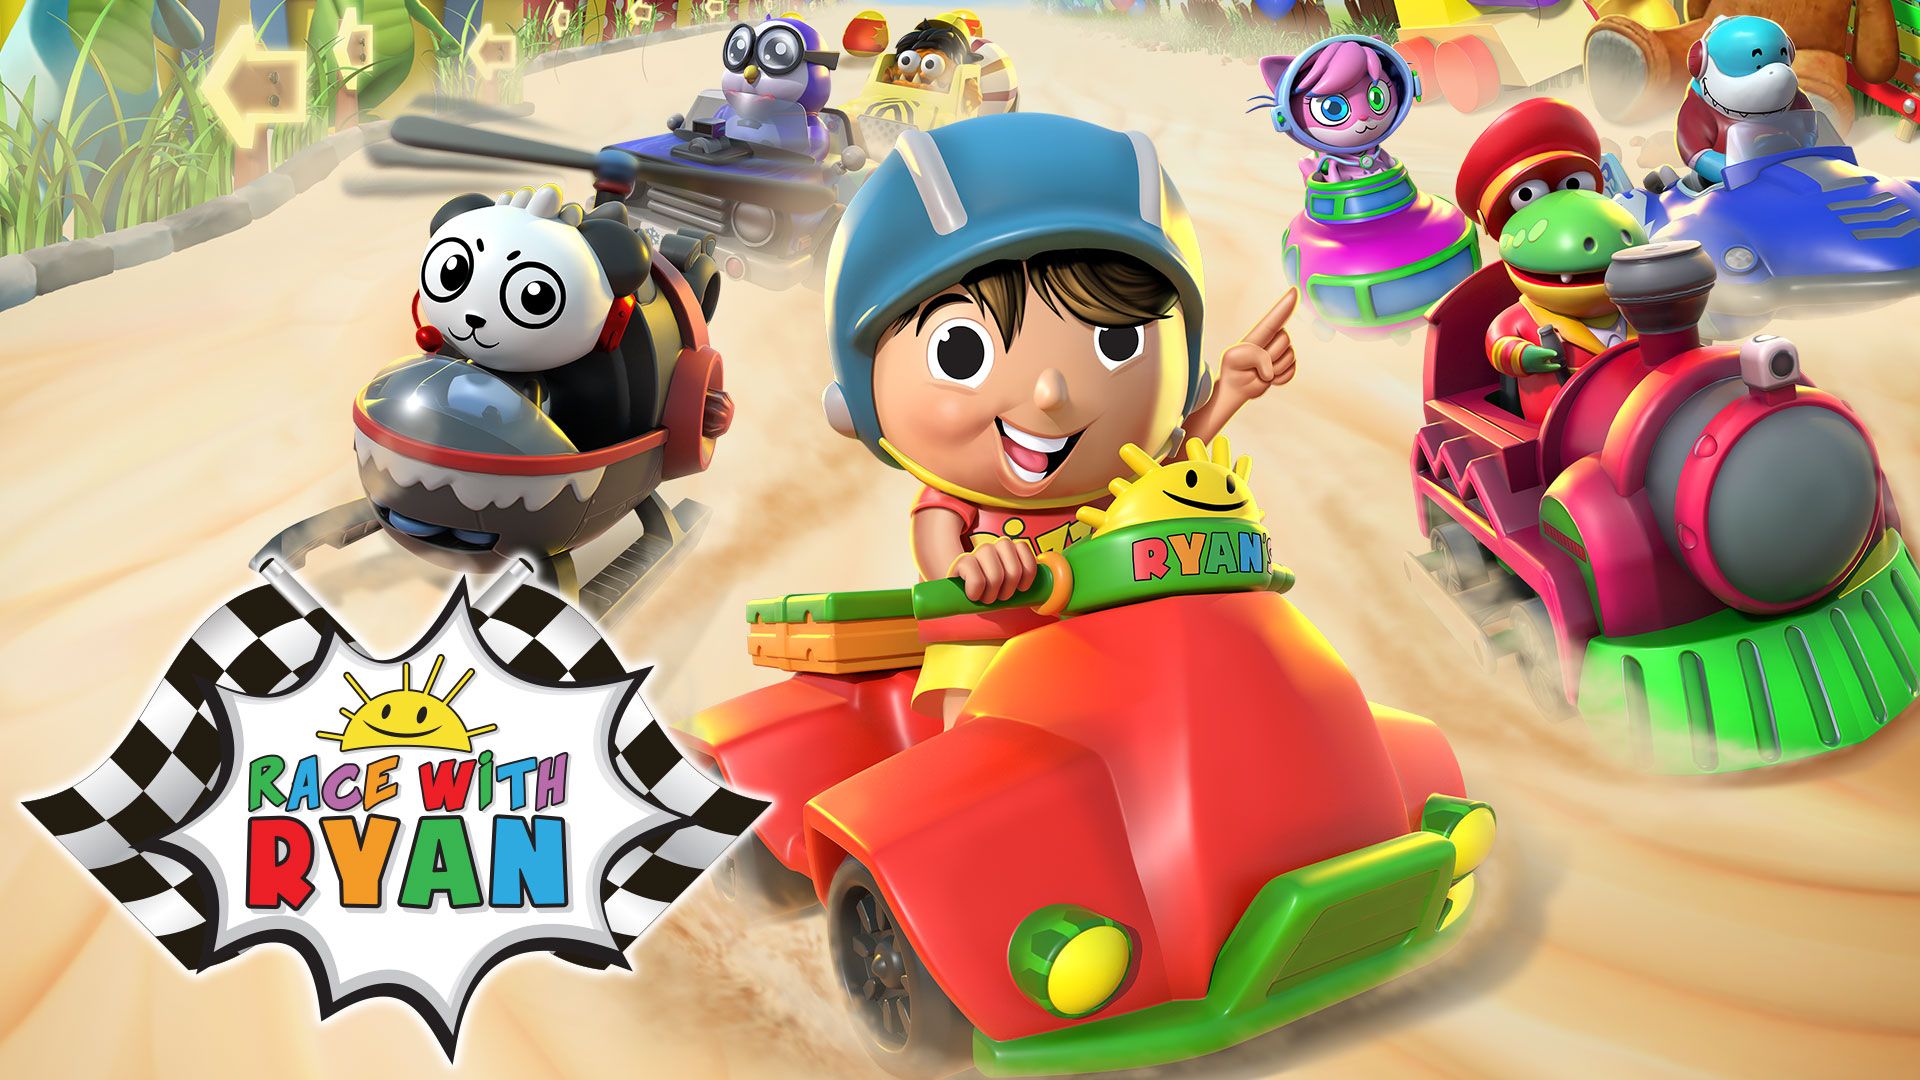 Race with Ryan for Nintendo Switch Game Details